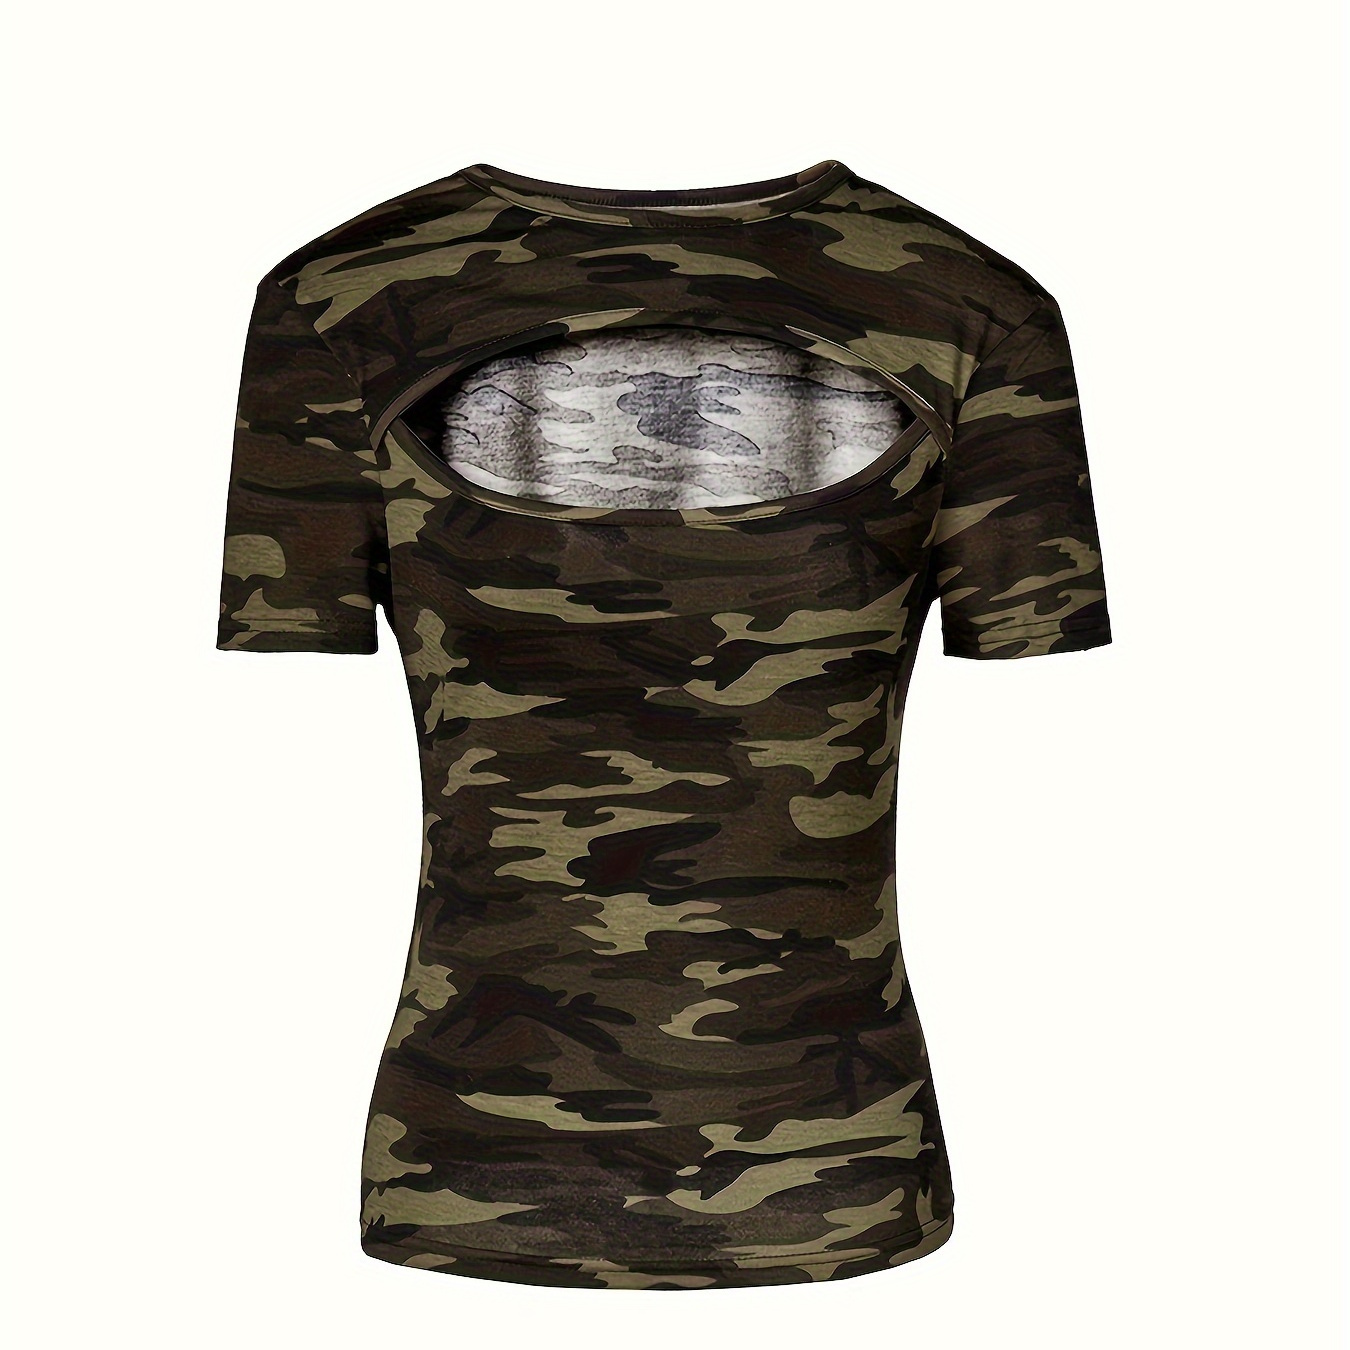 

Camo Print Crew Neck T-shirt, Casual Short Sleeve Cut Out Crop Top For Spring & Summer, Women's Clothing